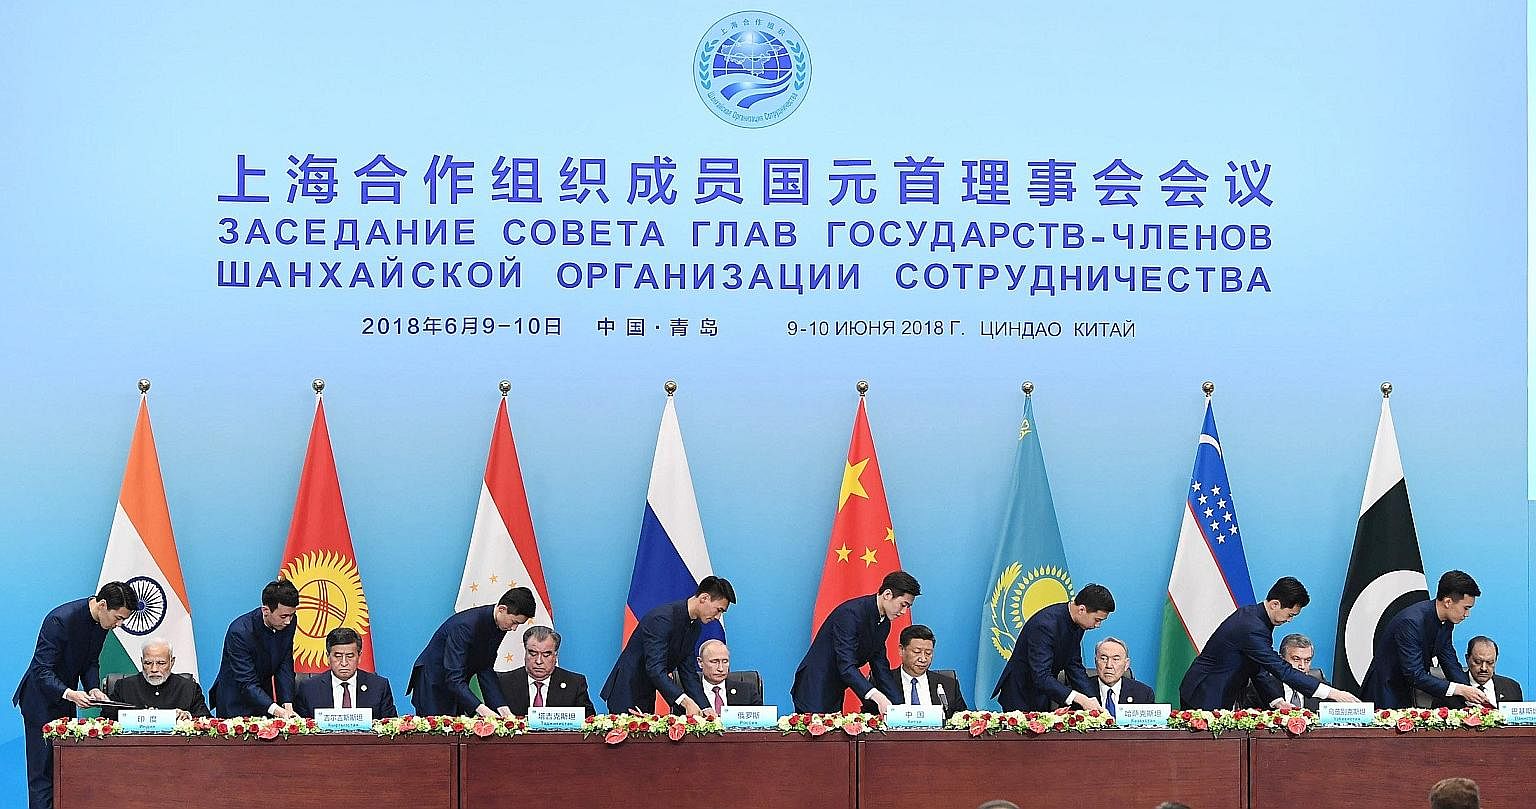 Leaders of the eight countries under the Shanghai Cooperation Organisation at a signing ceremony over the weekend. The China Daily newspaper said the summit was a good example of multilateral cooperation, offering a "new vision" for a more just and e